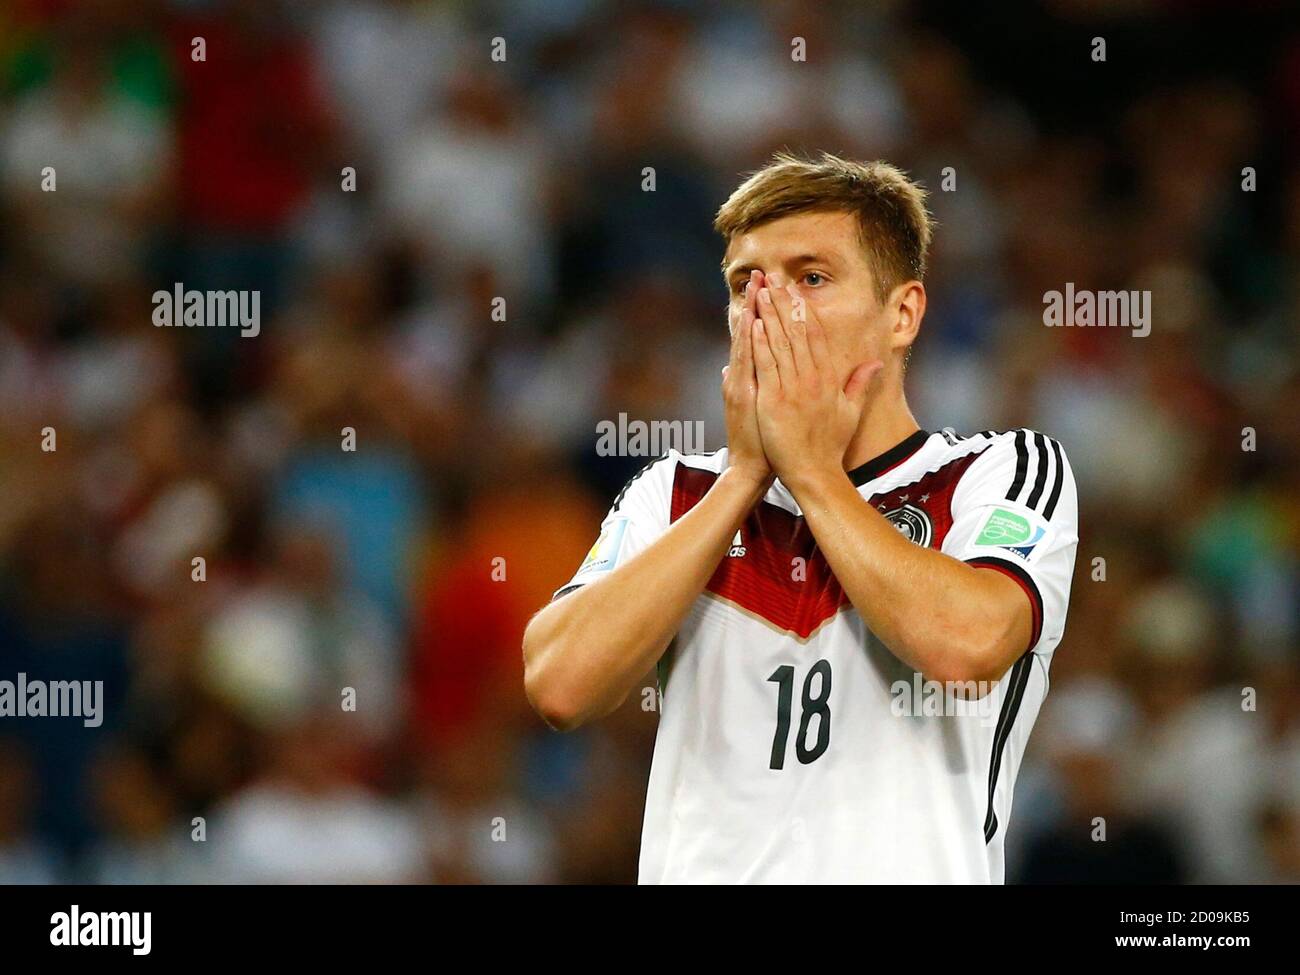 Germany's Toni Kroos reacts to a missed goal shot during the 2014 World Cup  final between Germany and Argentina at the Maracana stadium in Rio de  Janeiro July 13, 2014. REUTERS/Michael Dalder (